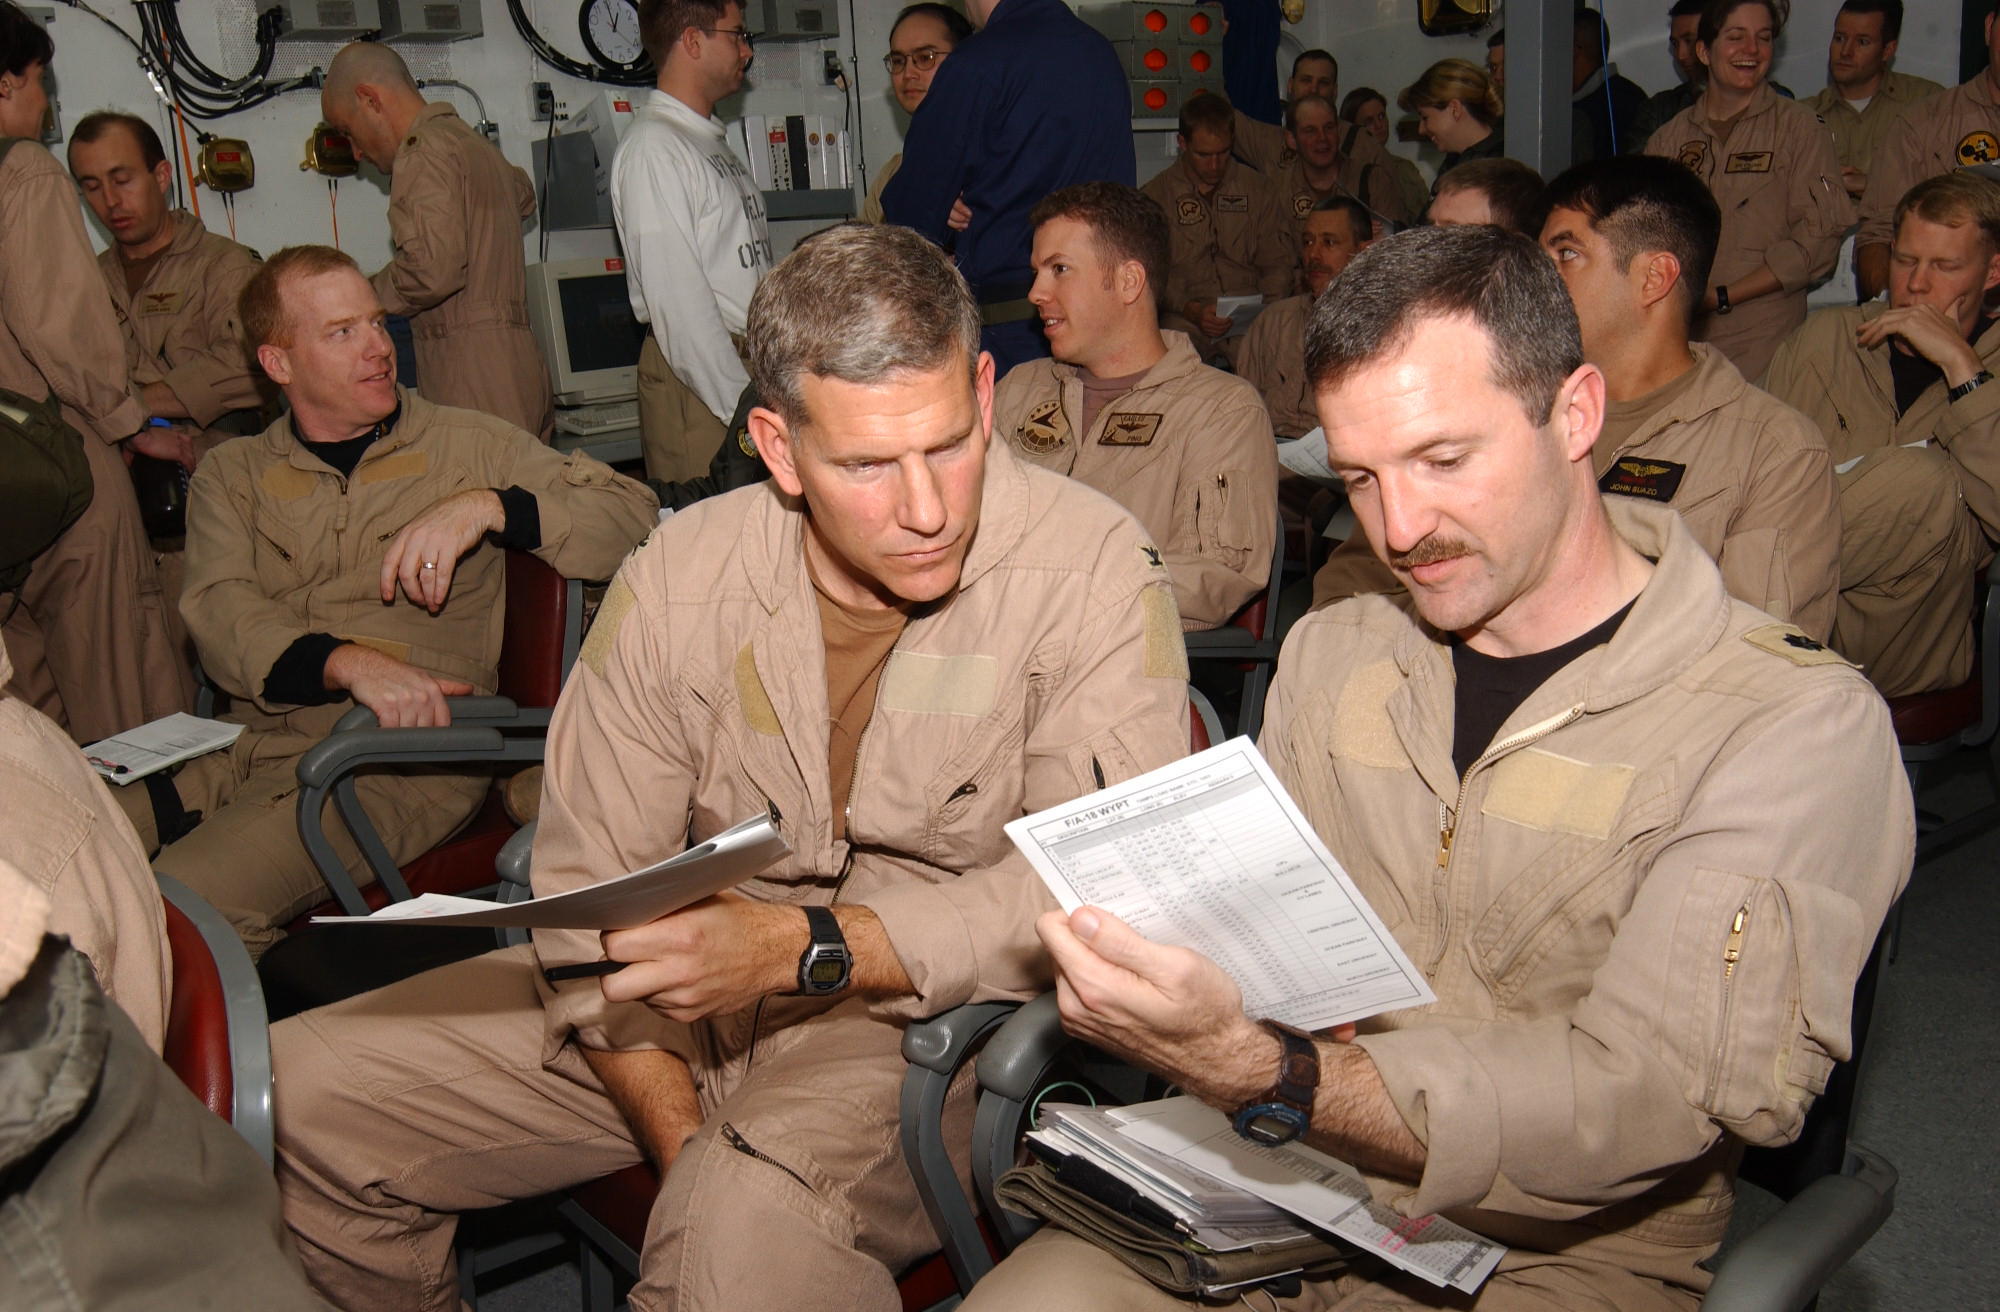 US Navy 030323-N-5932S-007 Two Naval Aviators assigned to Carrier Air Wing Fourteen (CVW-14) prepare for a brief in a squadron ready room aboard the aircraft carrier USS Abraham Lincoln (CVN 72)